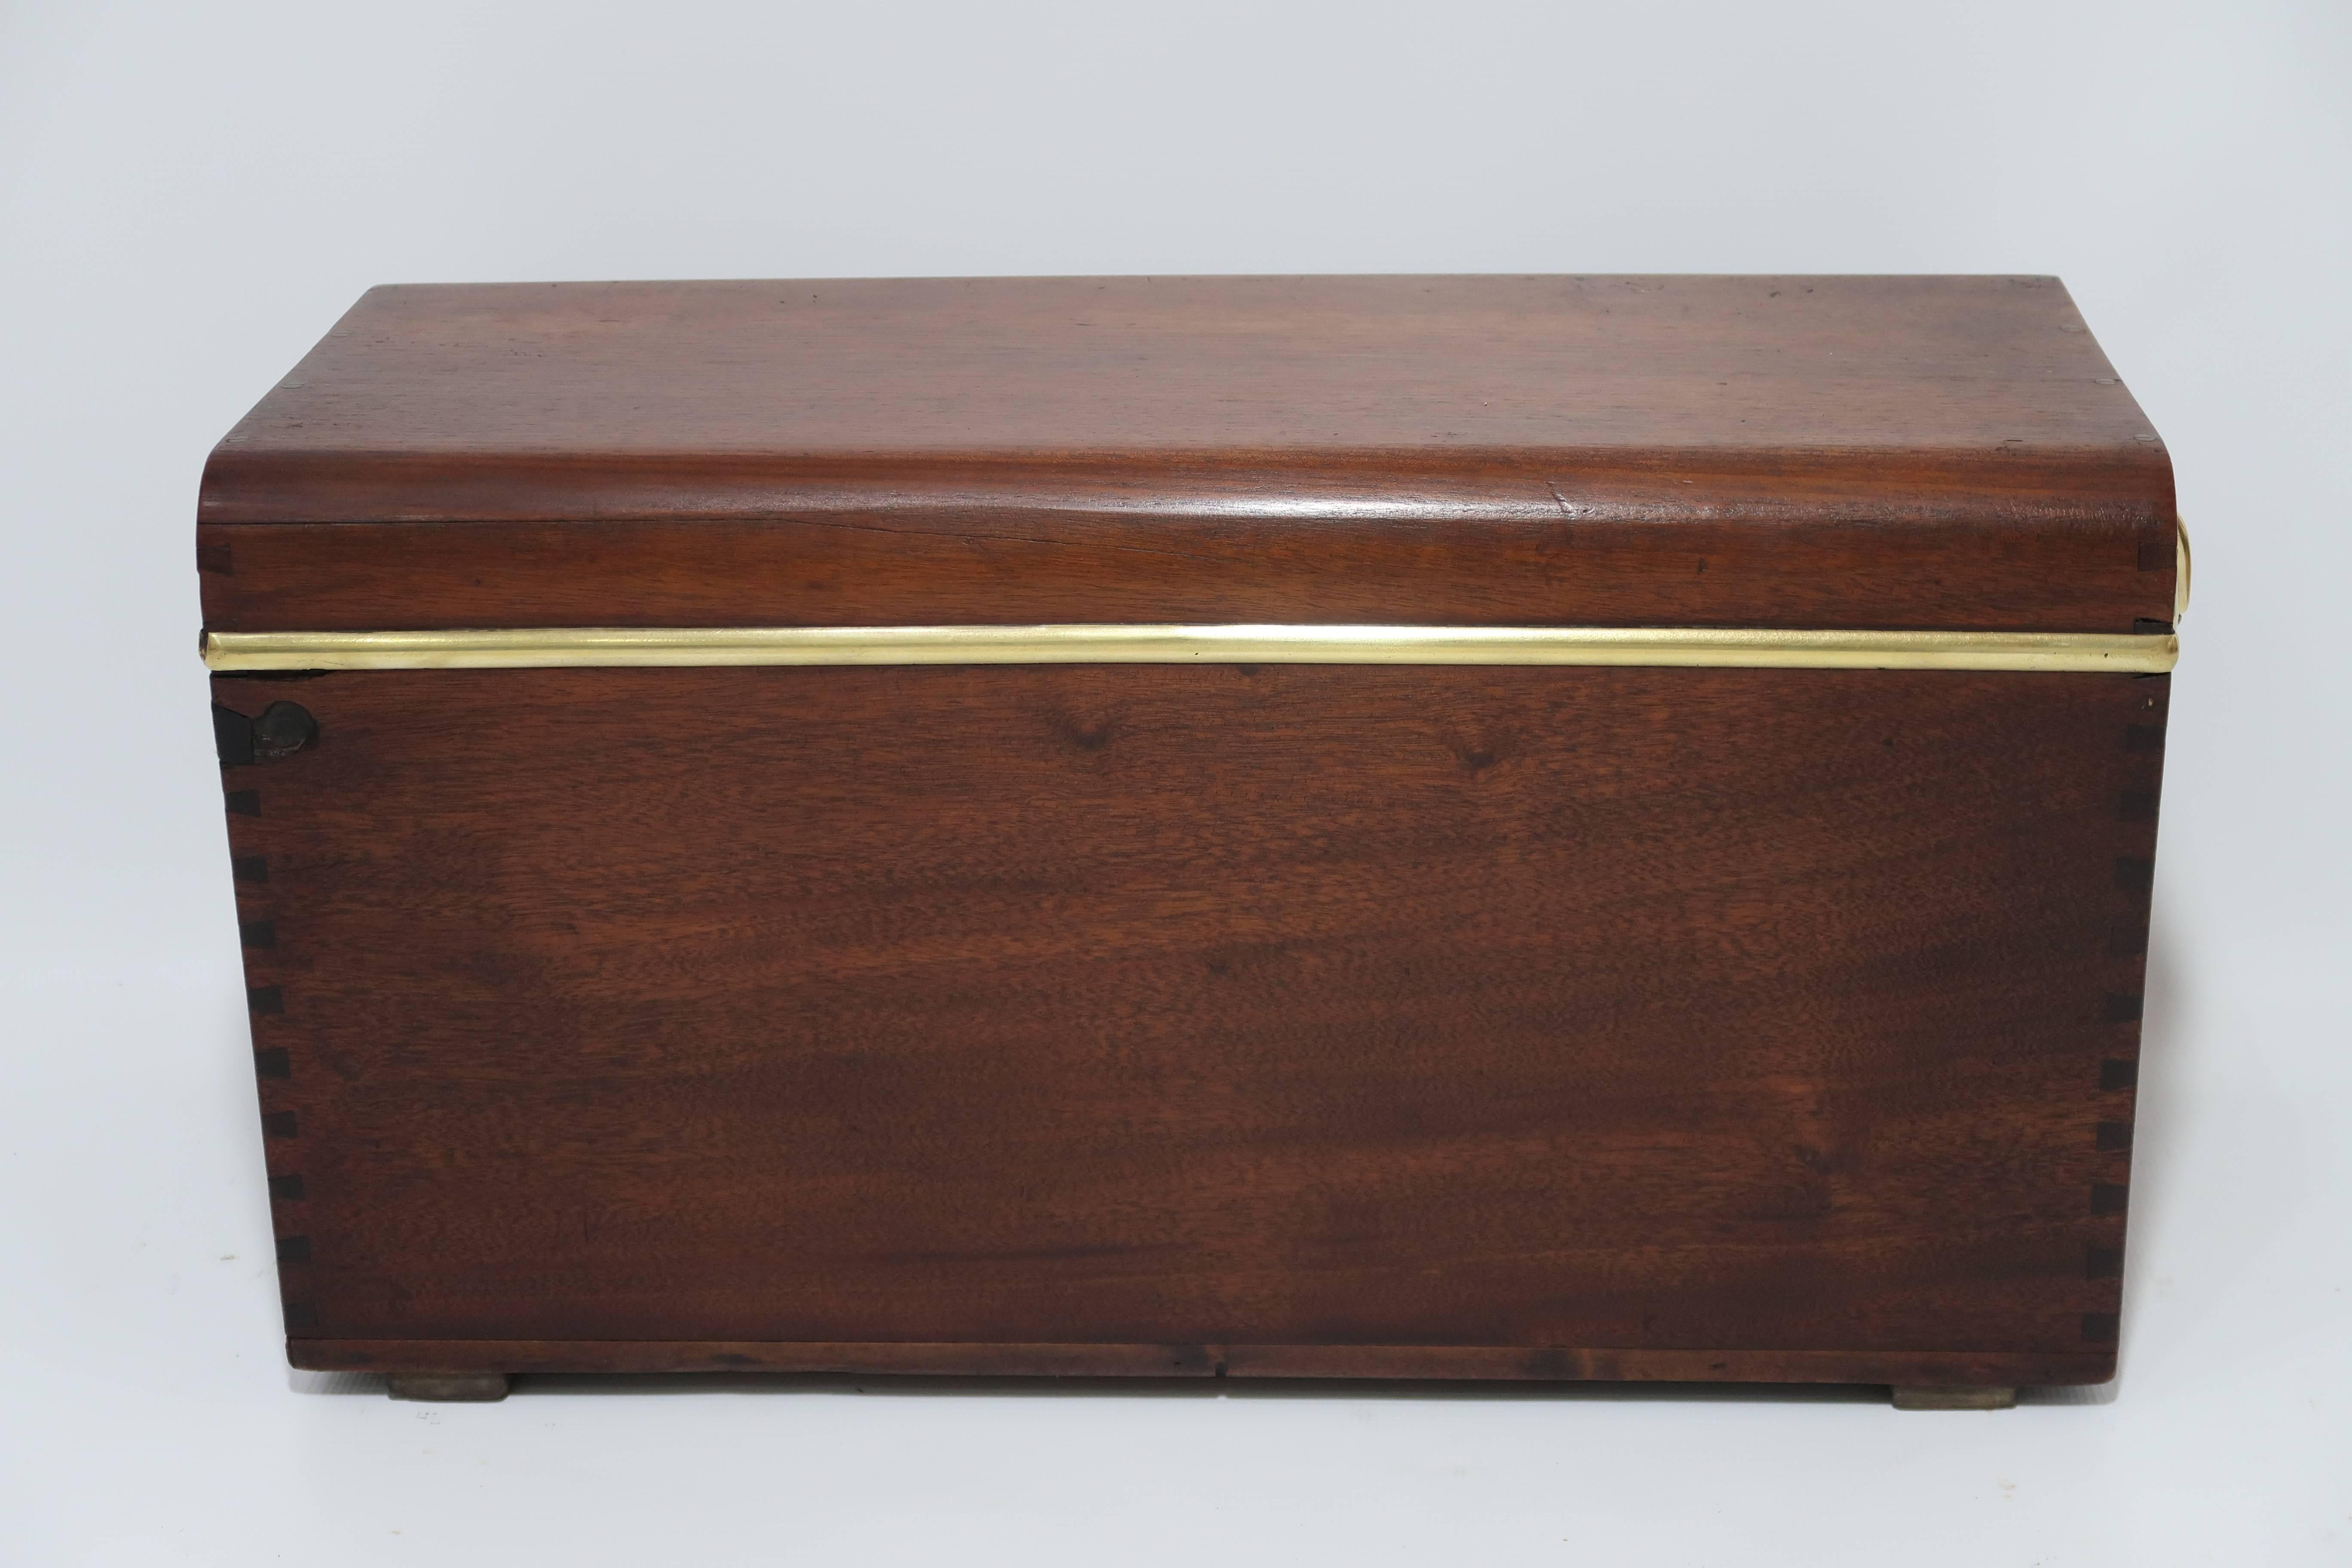 Early 20th Century 1900s Louis Vuitton Wooden Tool Box Trunk, 1 of the 100 Legendary Trunks For Sale